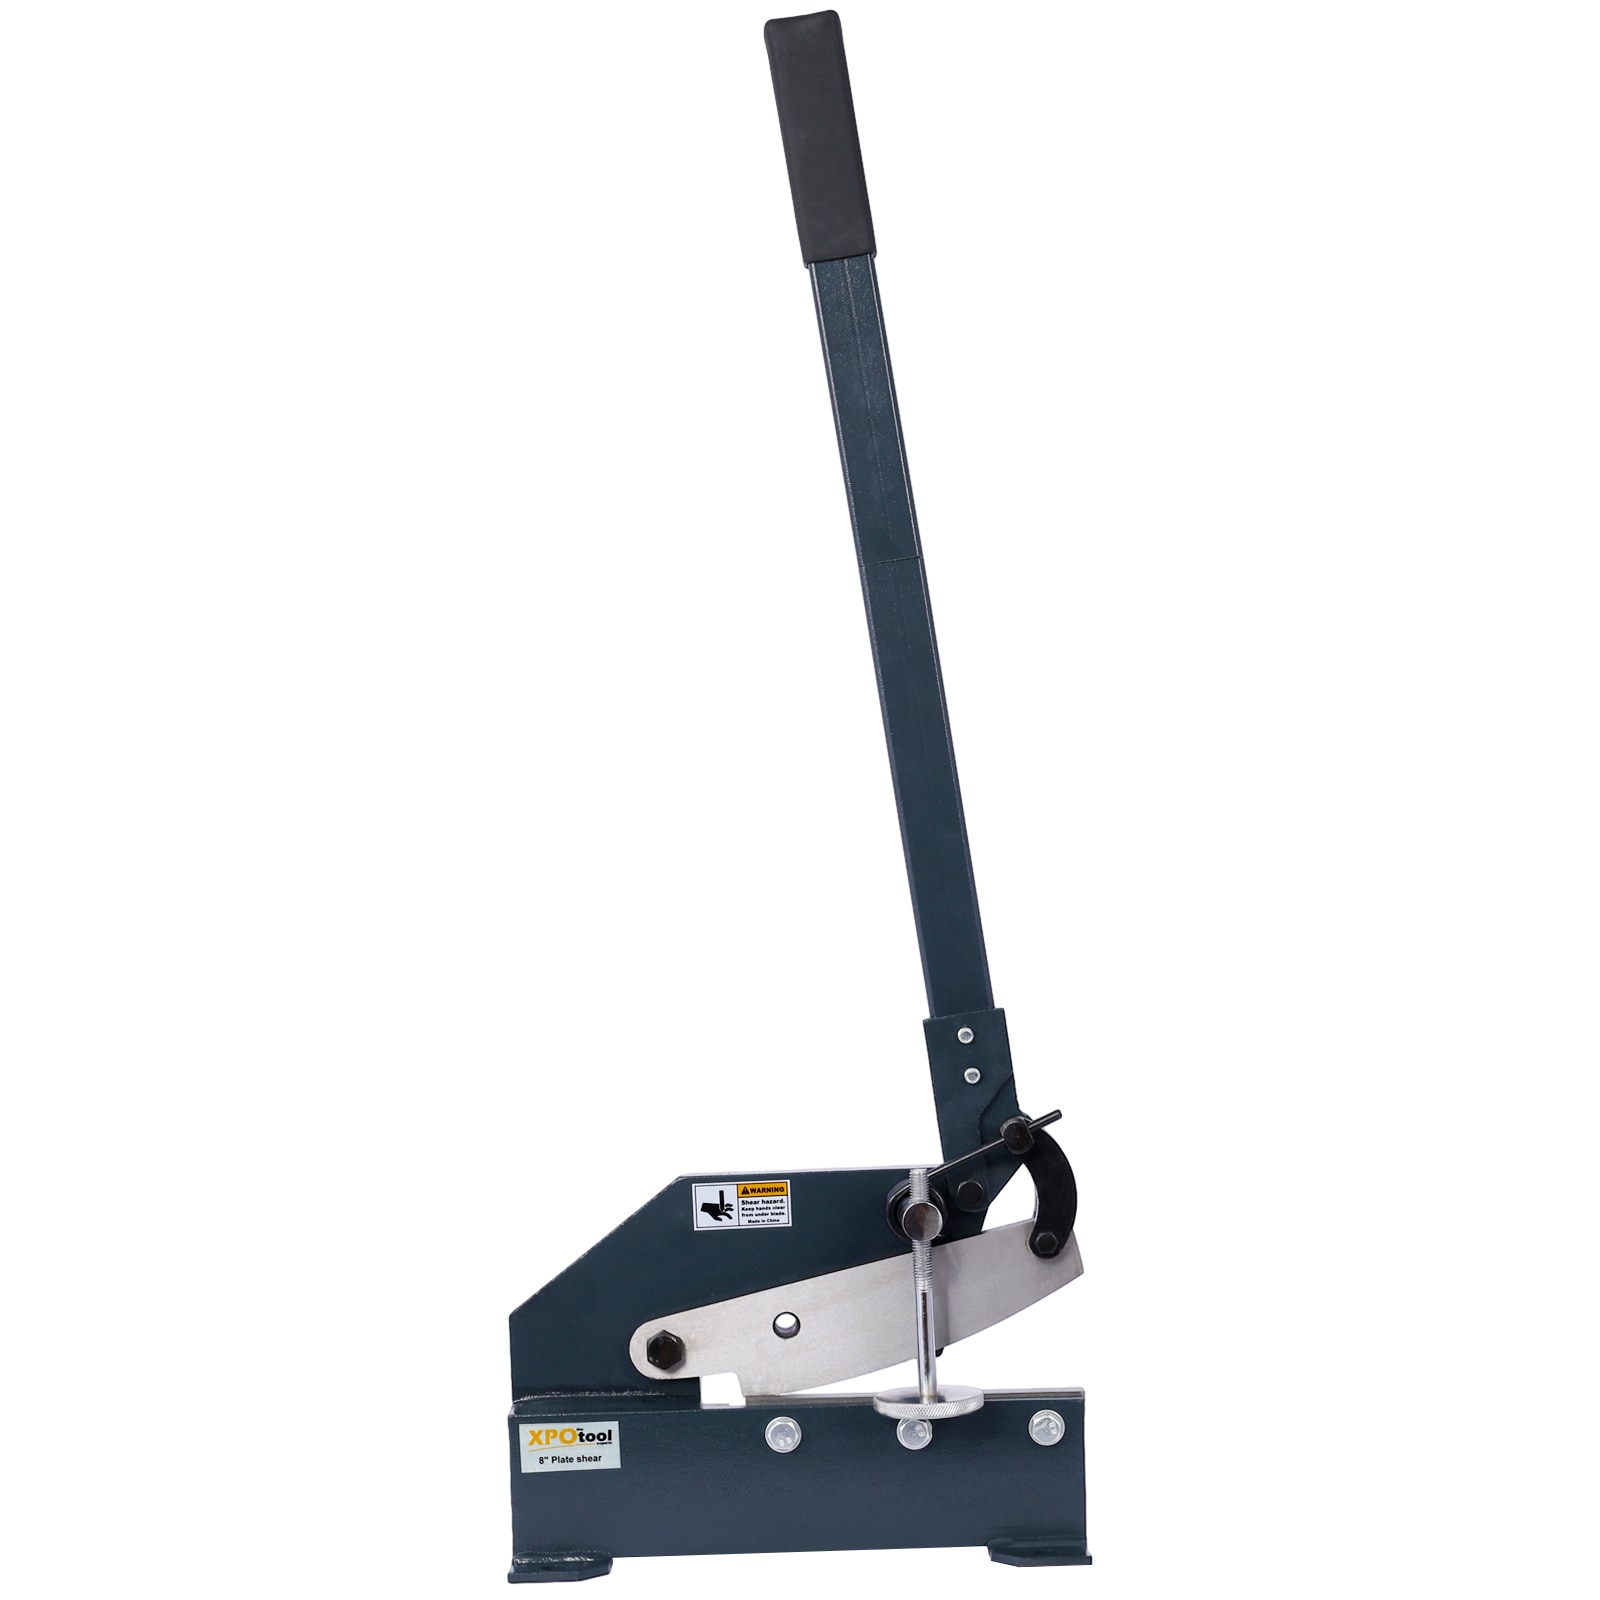 WEN 3670 Variable Speed Electric Fiber Cement and Siding Shear